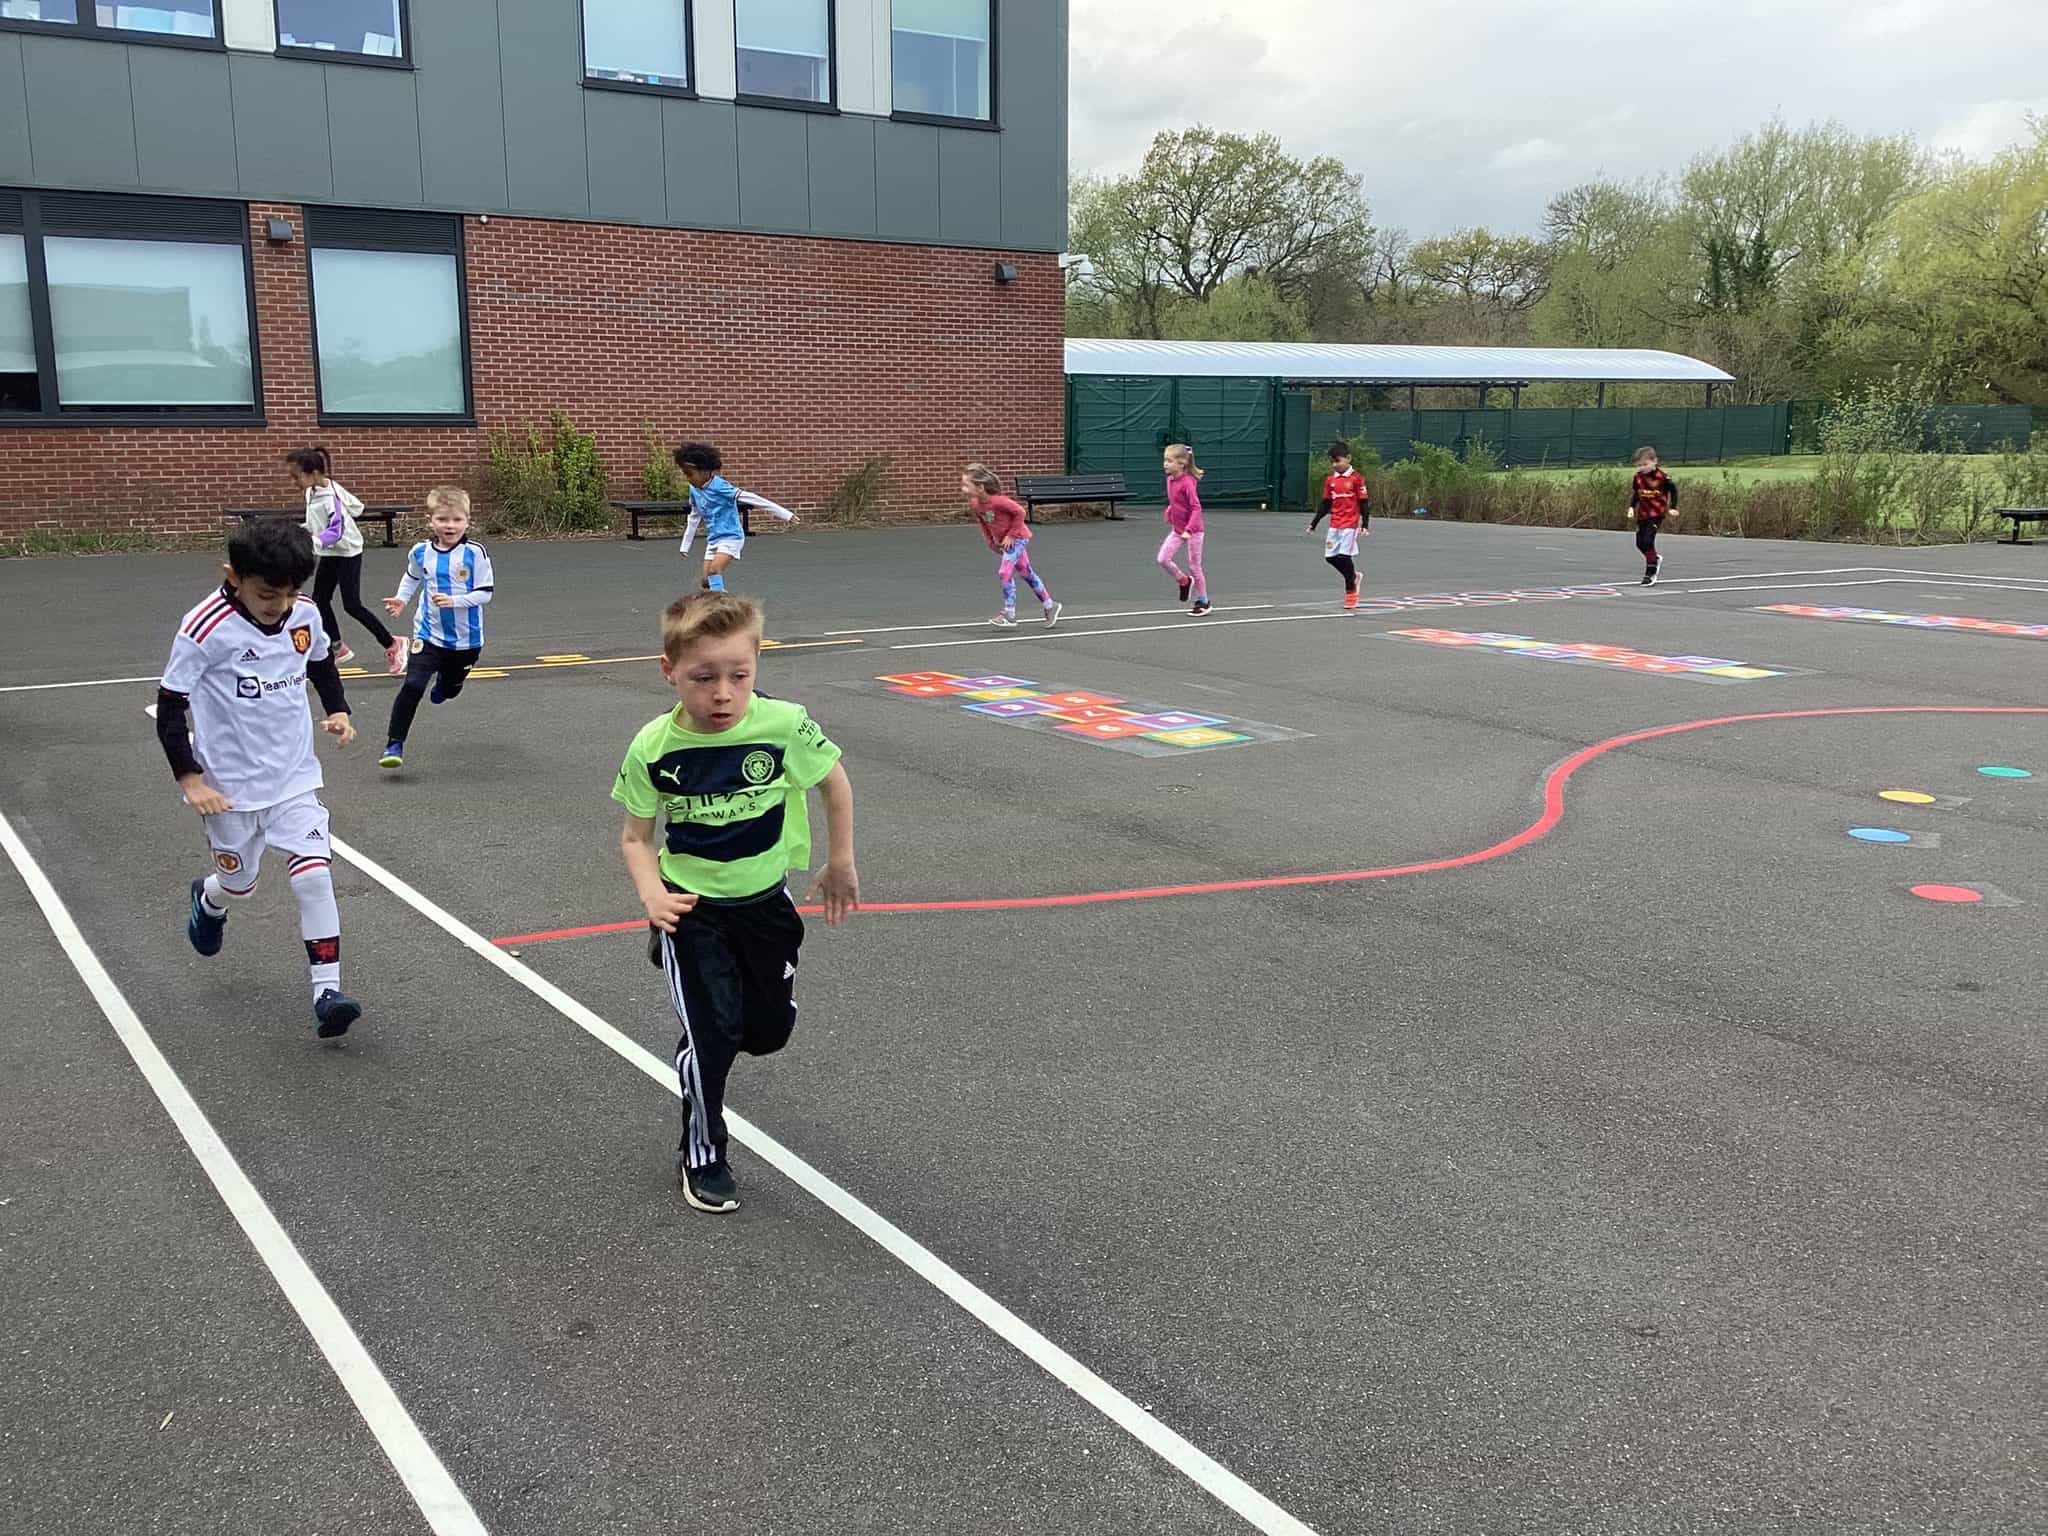 Pupils from Year 2 run along the playground track as they complete their section of the walk